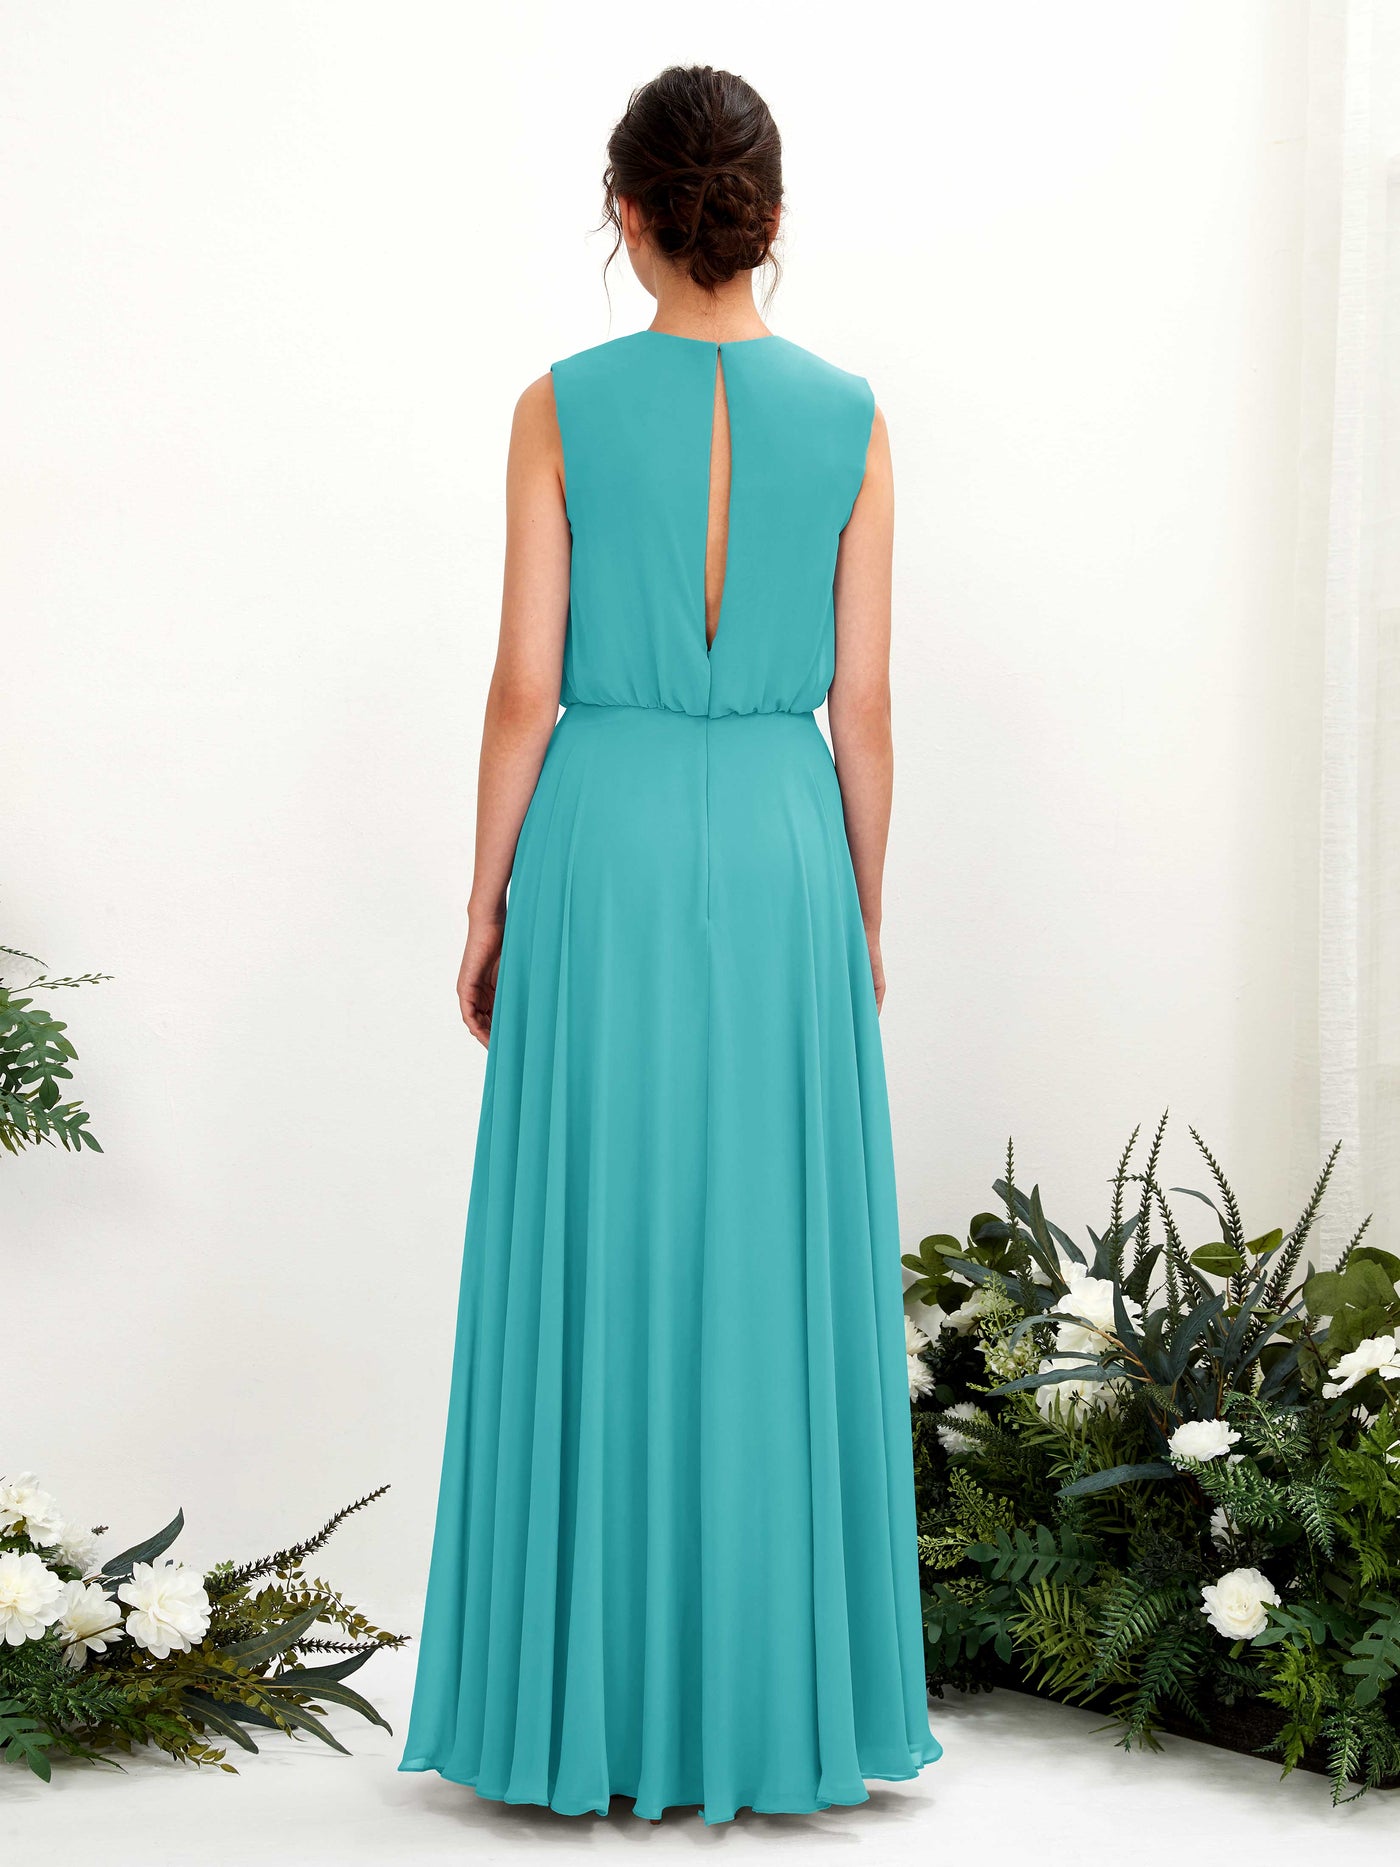 Turquoise Bridesmaid Dresses Bridesmaid Dress A-line Chiffon Round Full Length Sleeveless Wedding Party Dress (81222823)#color_turquoise